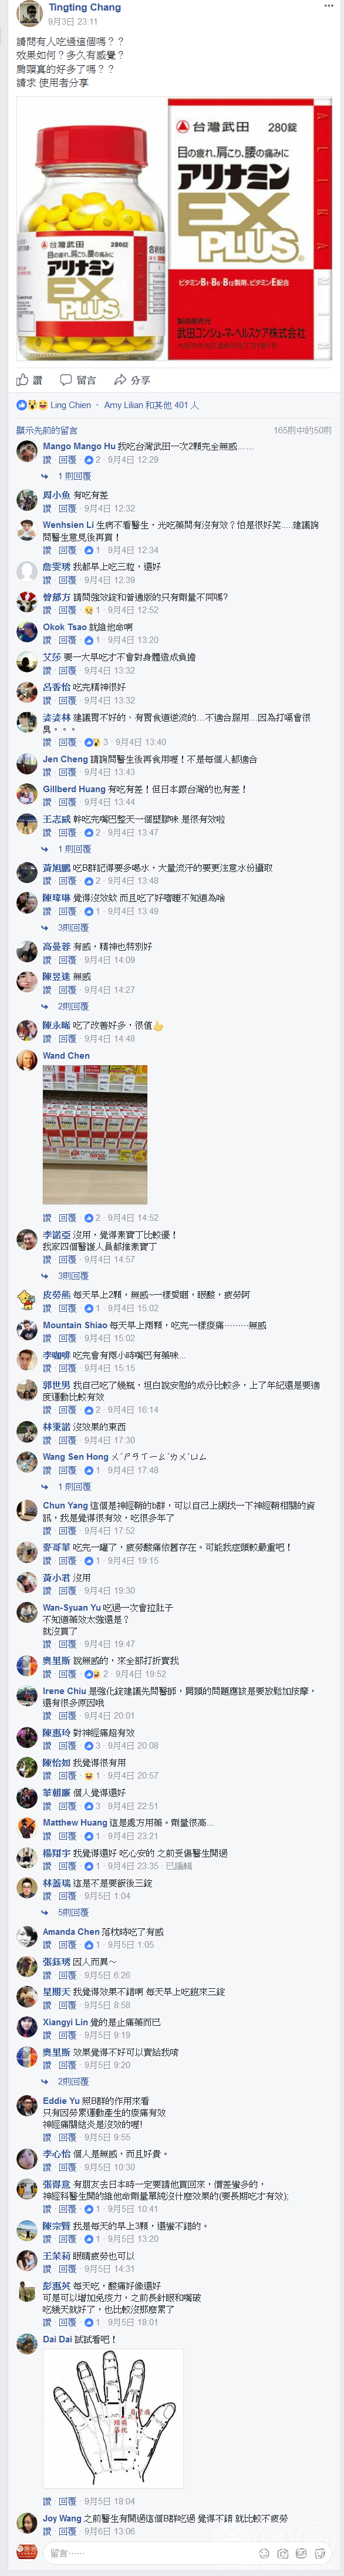 Costco_comment-0017.png